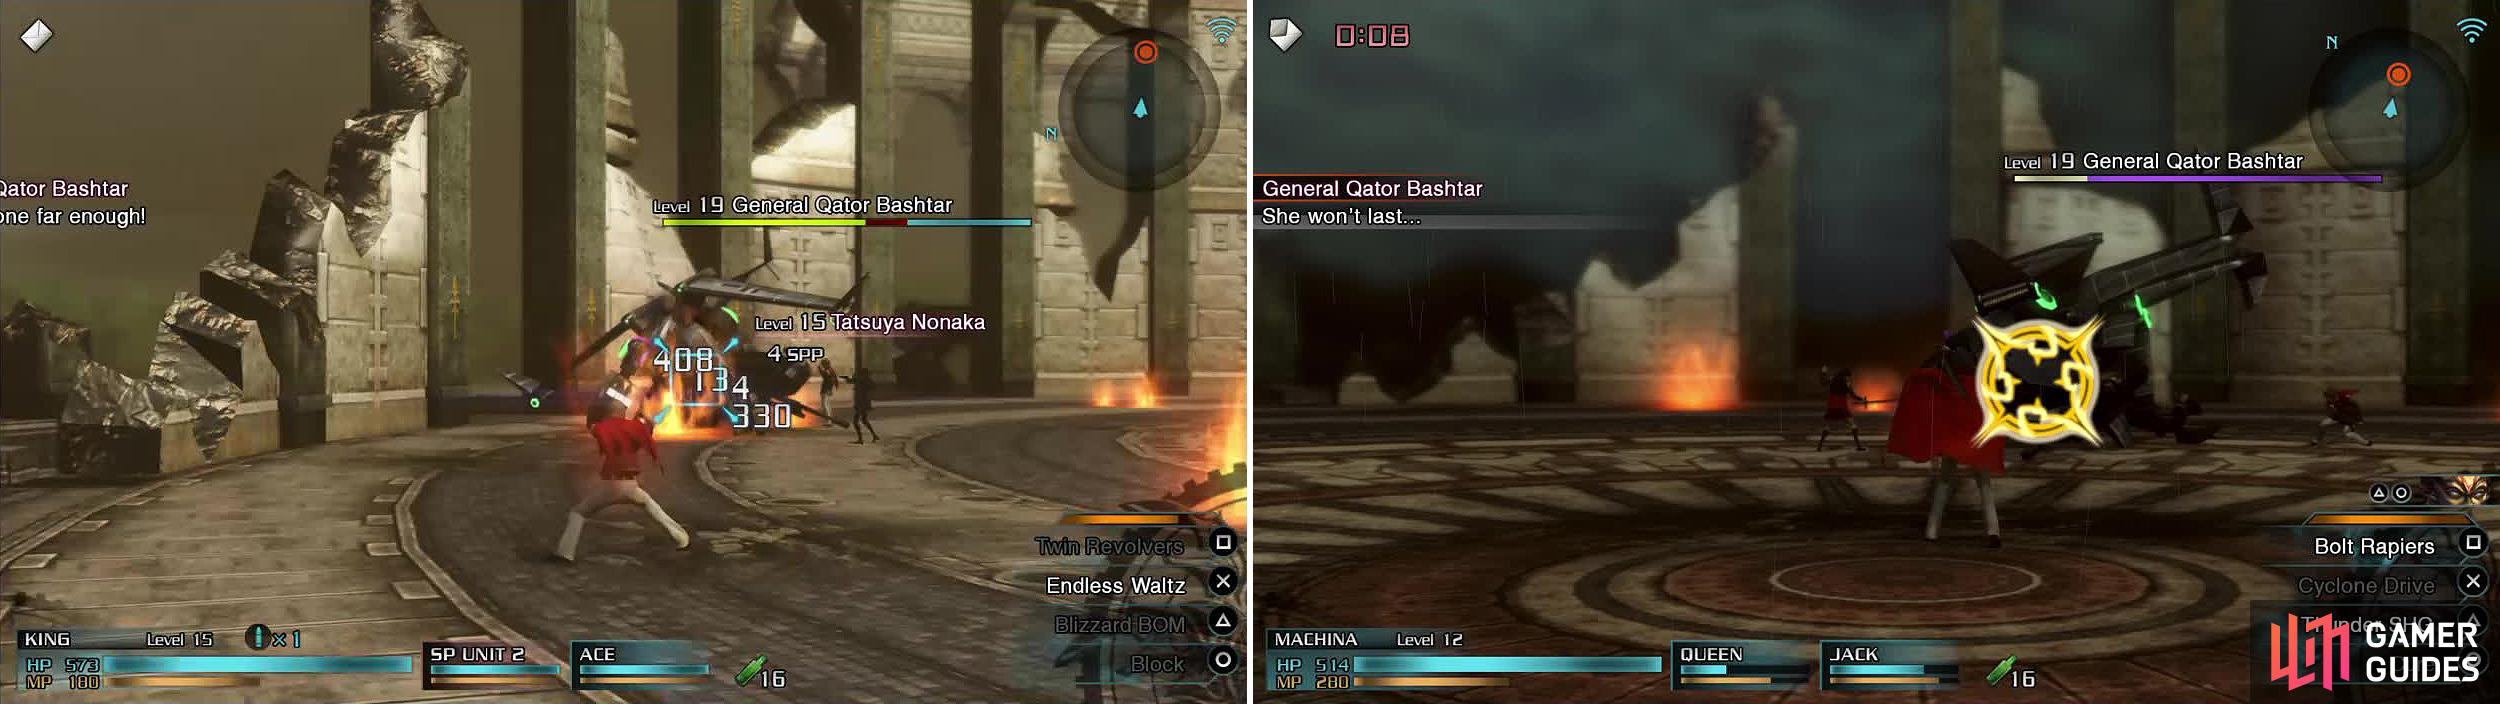 Hit Breaksights (left) to damage Bashtar when he's on the ground. Once it's raining, you can make use of his weakness to Thunder magic. Machina is an excellent choice here (right).